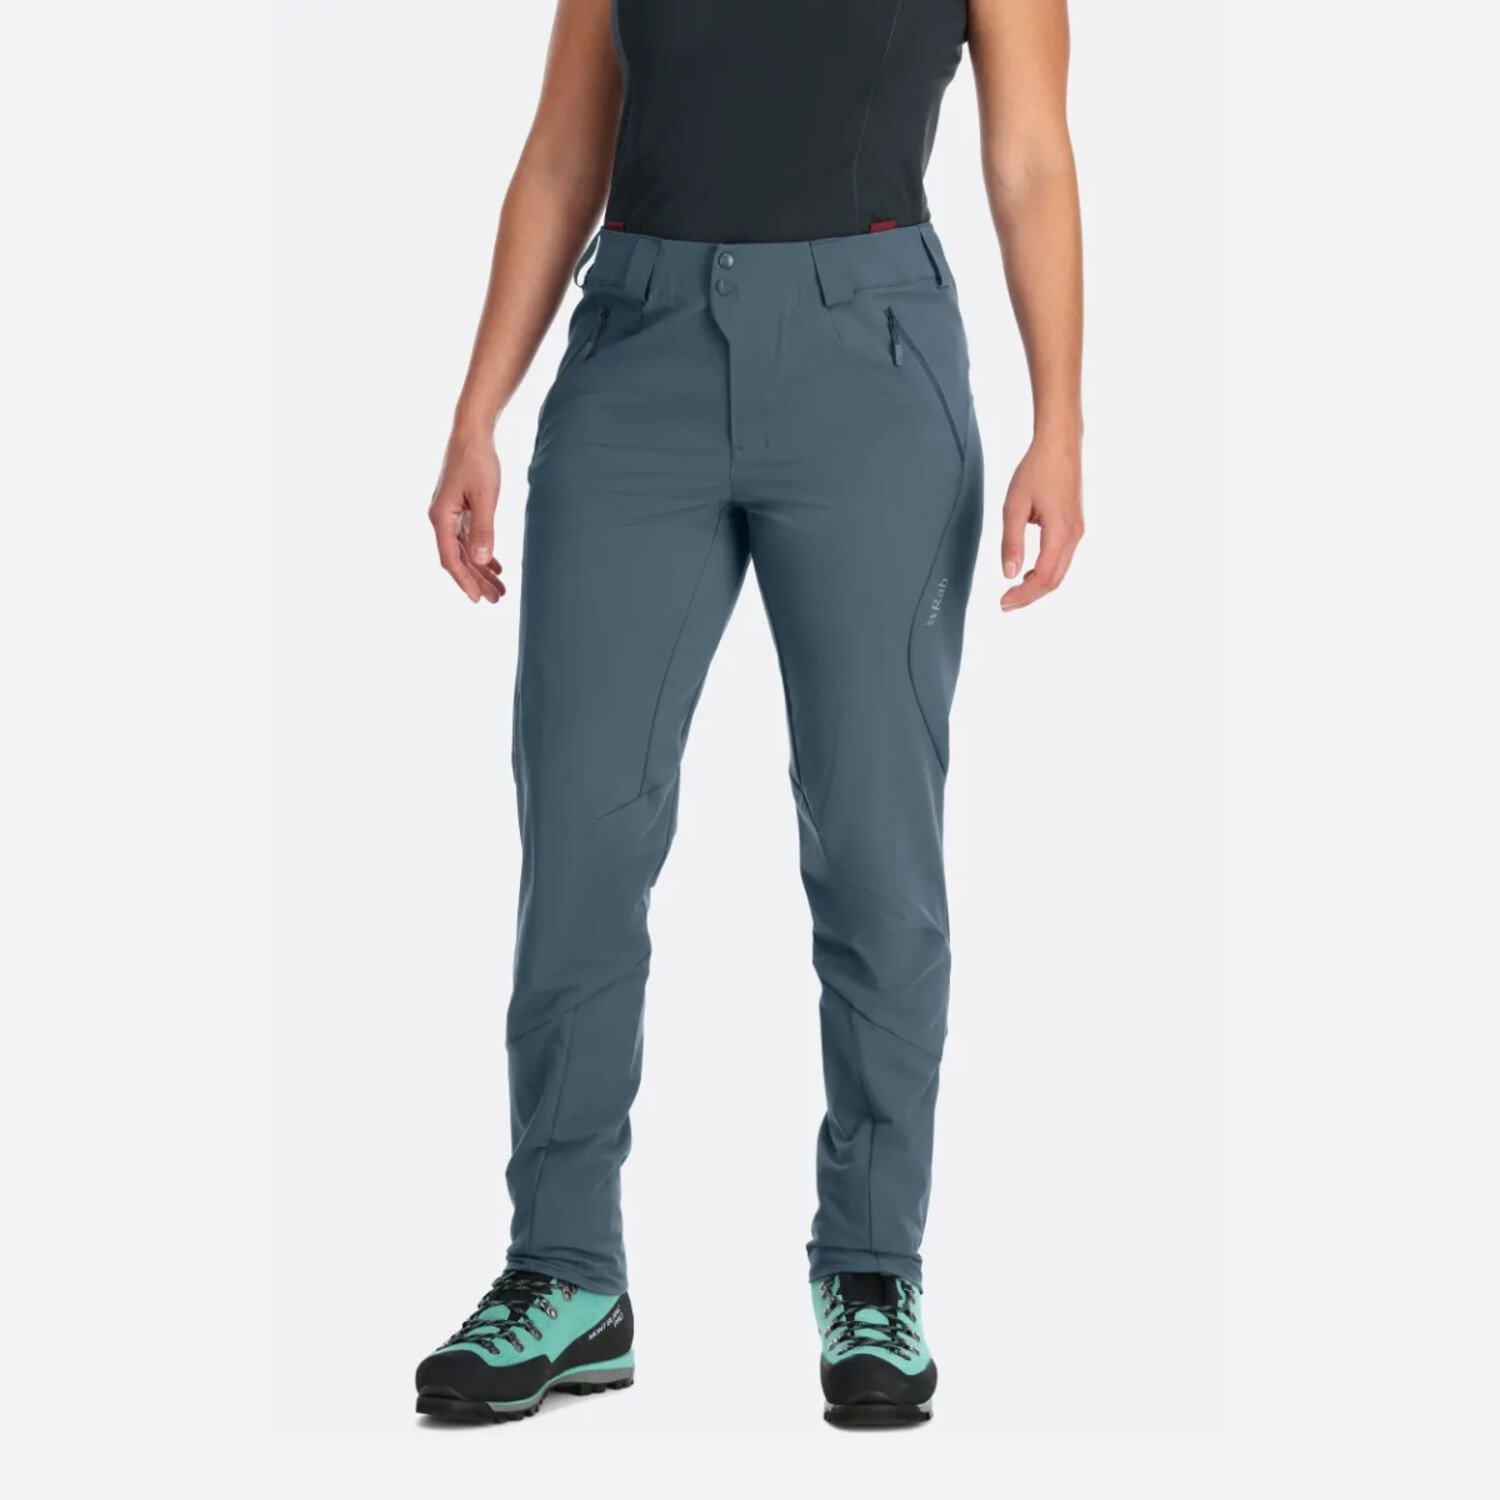 Should soft shell pants be this long? : r/wmnf